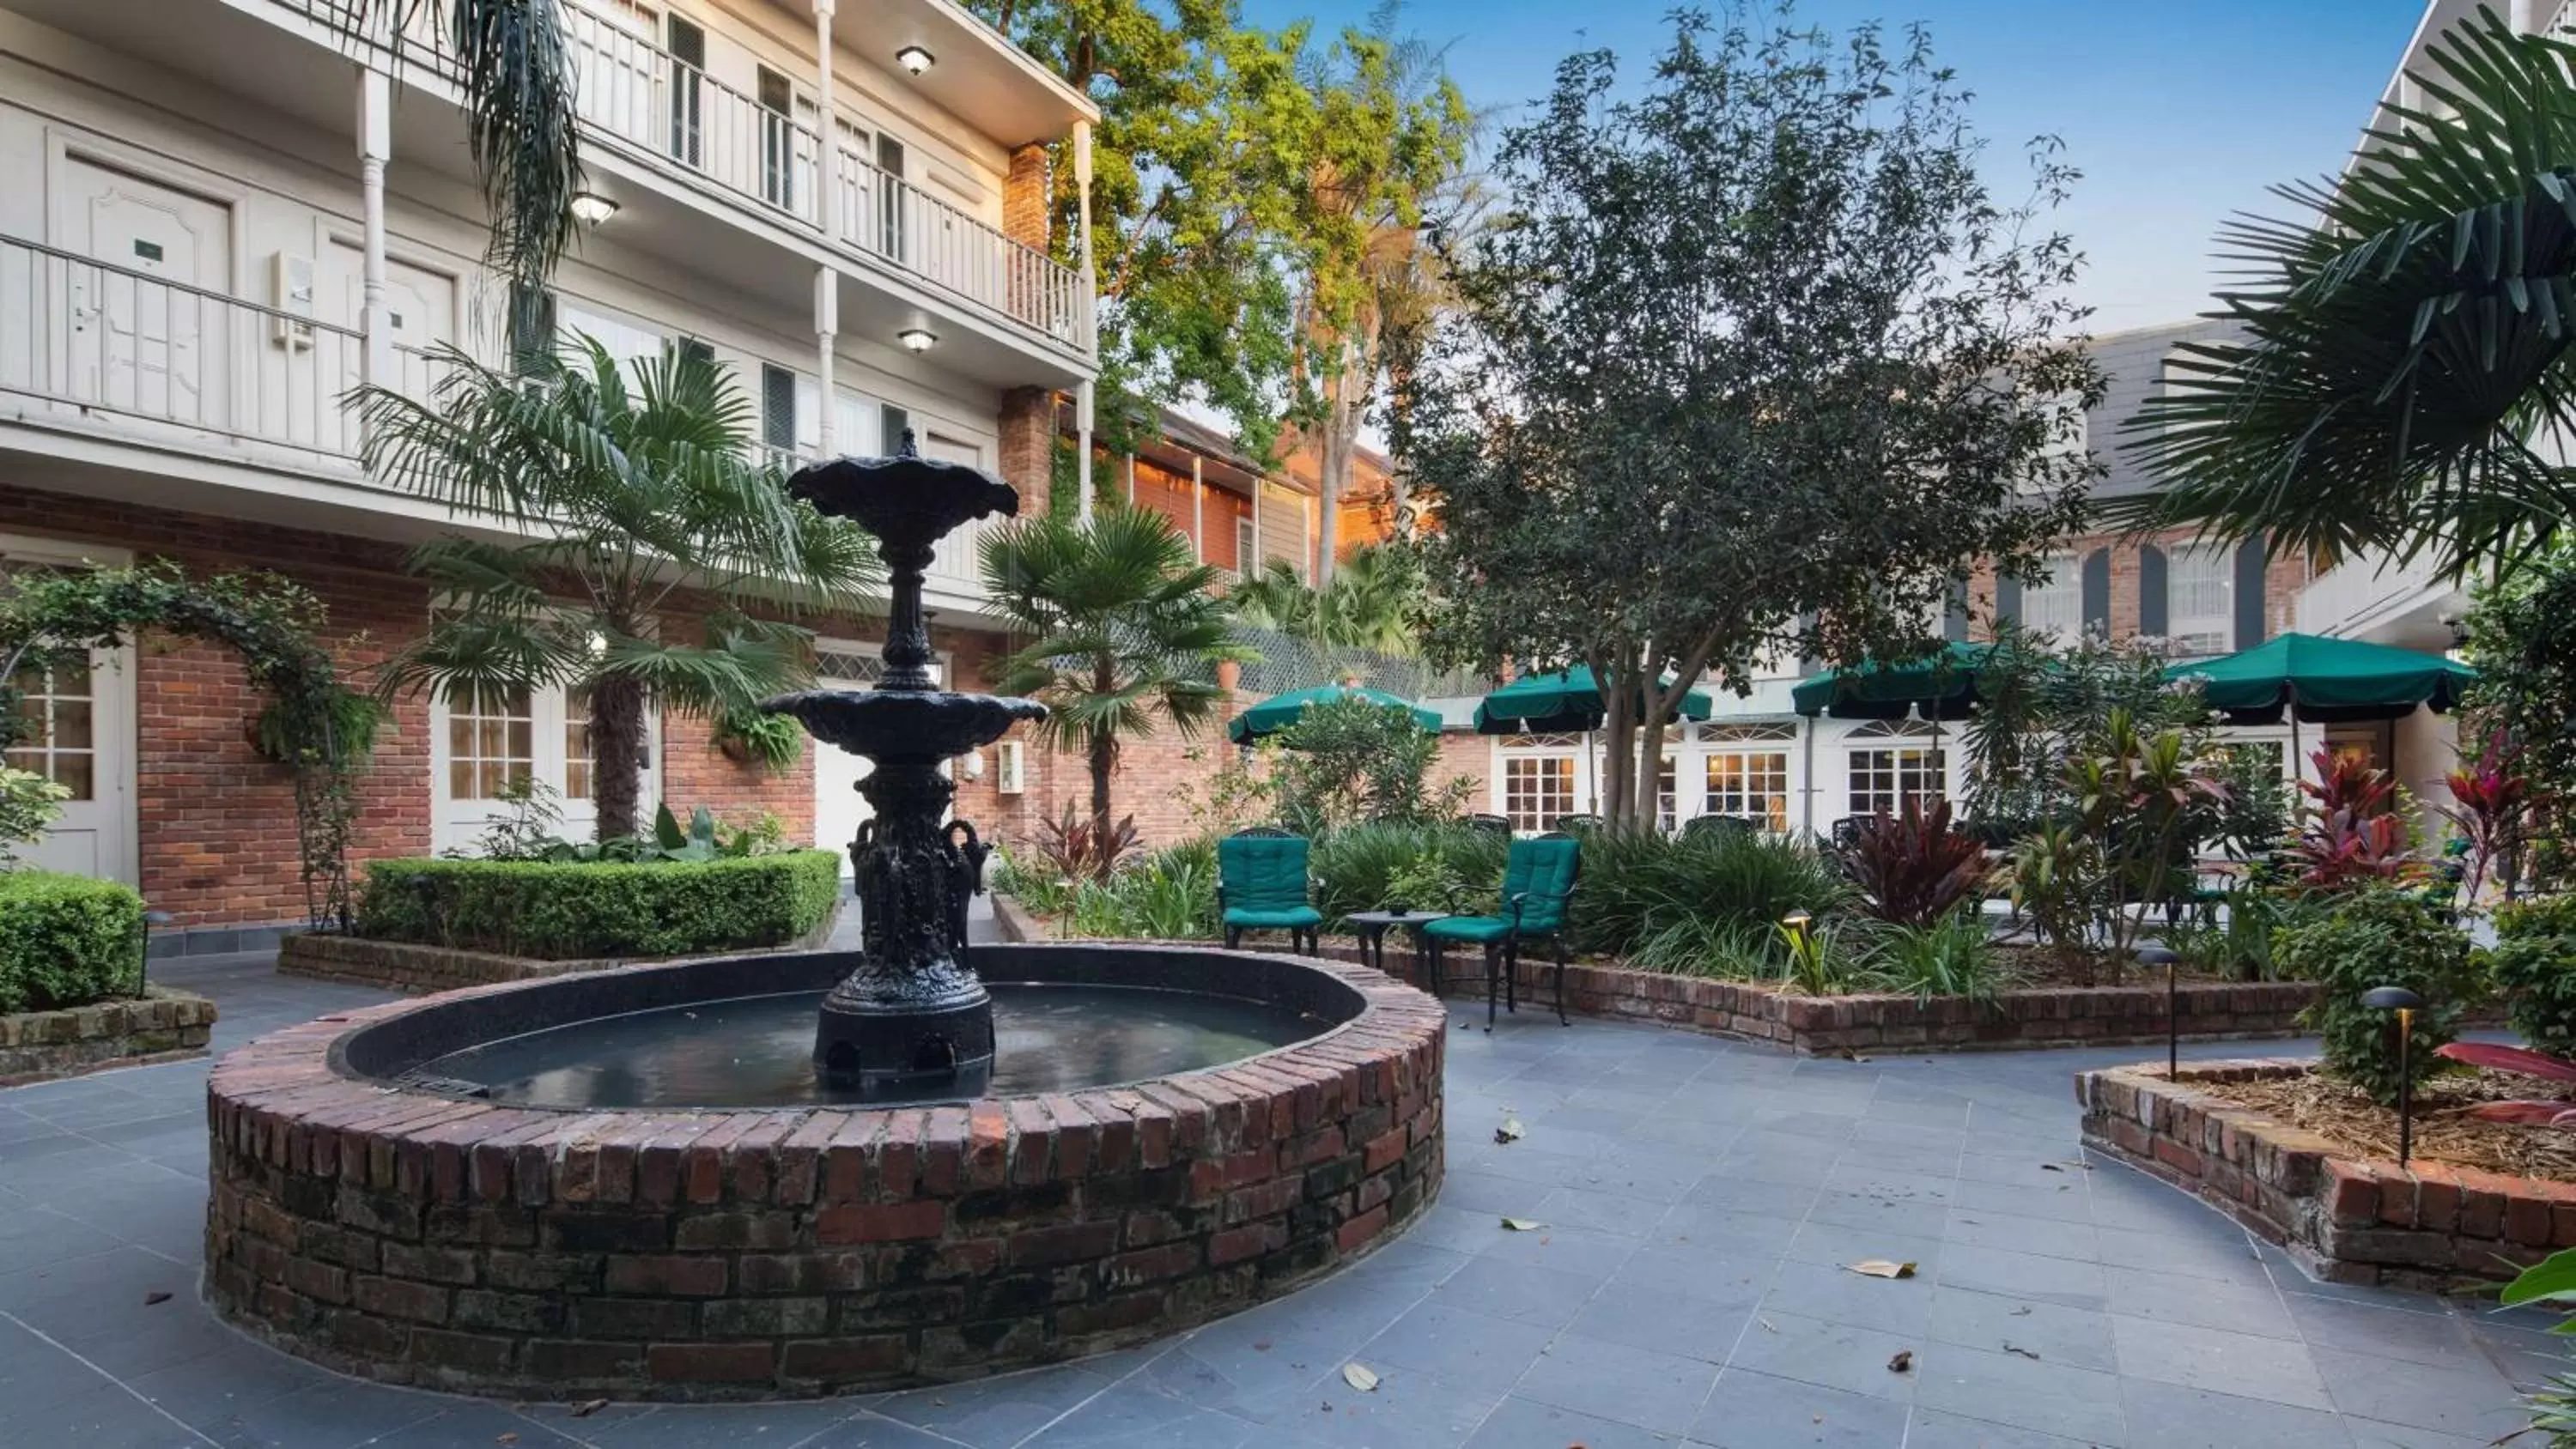 Property building in Best Western Plus French Quarter Courtyard Hotel